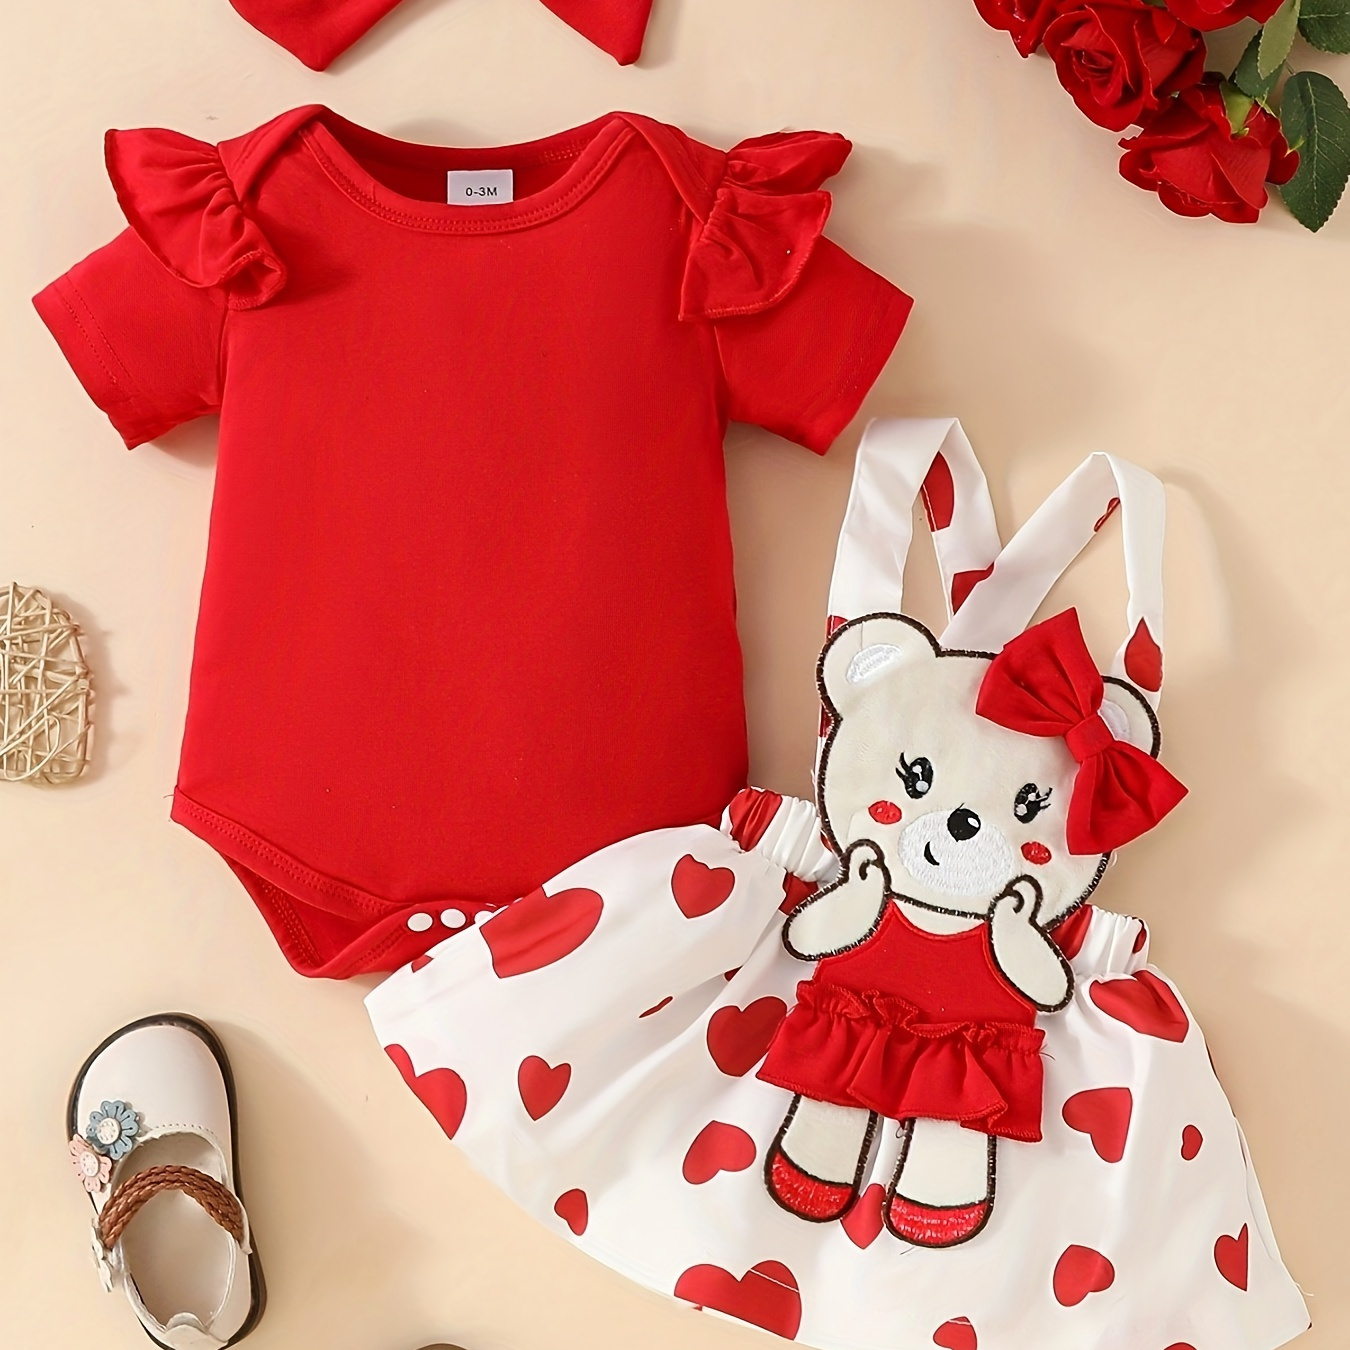 

Baby's Cute Bear Patchwork 2pcs Lovely Summer Outfit, Bodysuit & Suspender Overall Dress Set, Toddler & Infant Girl's Clothes For Daily/holiday/party